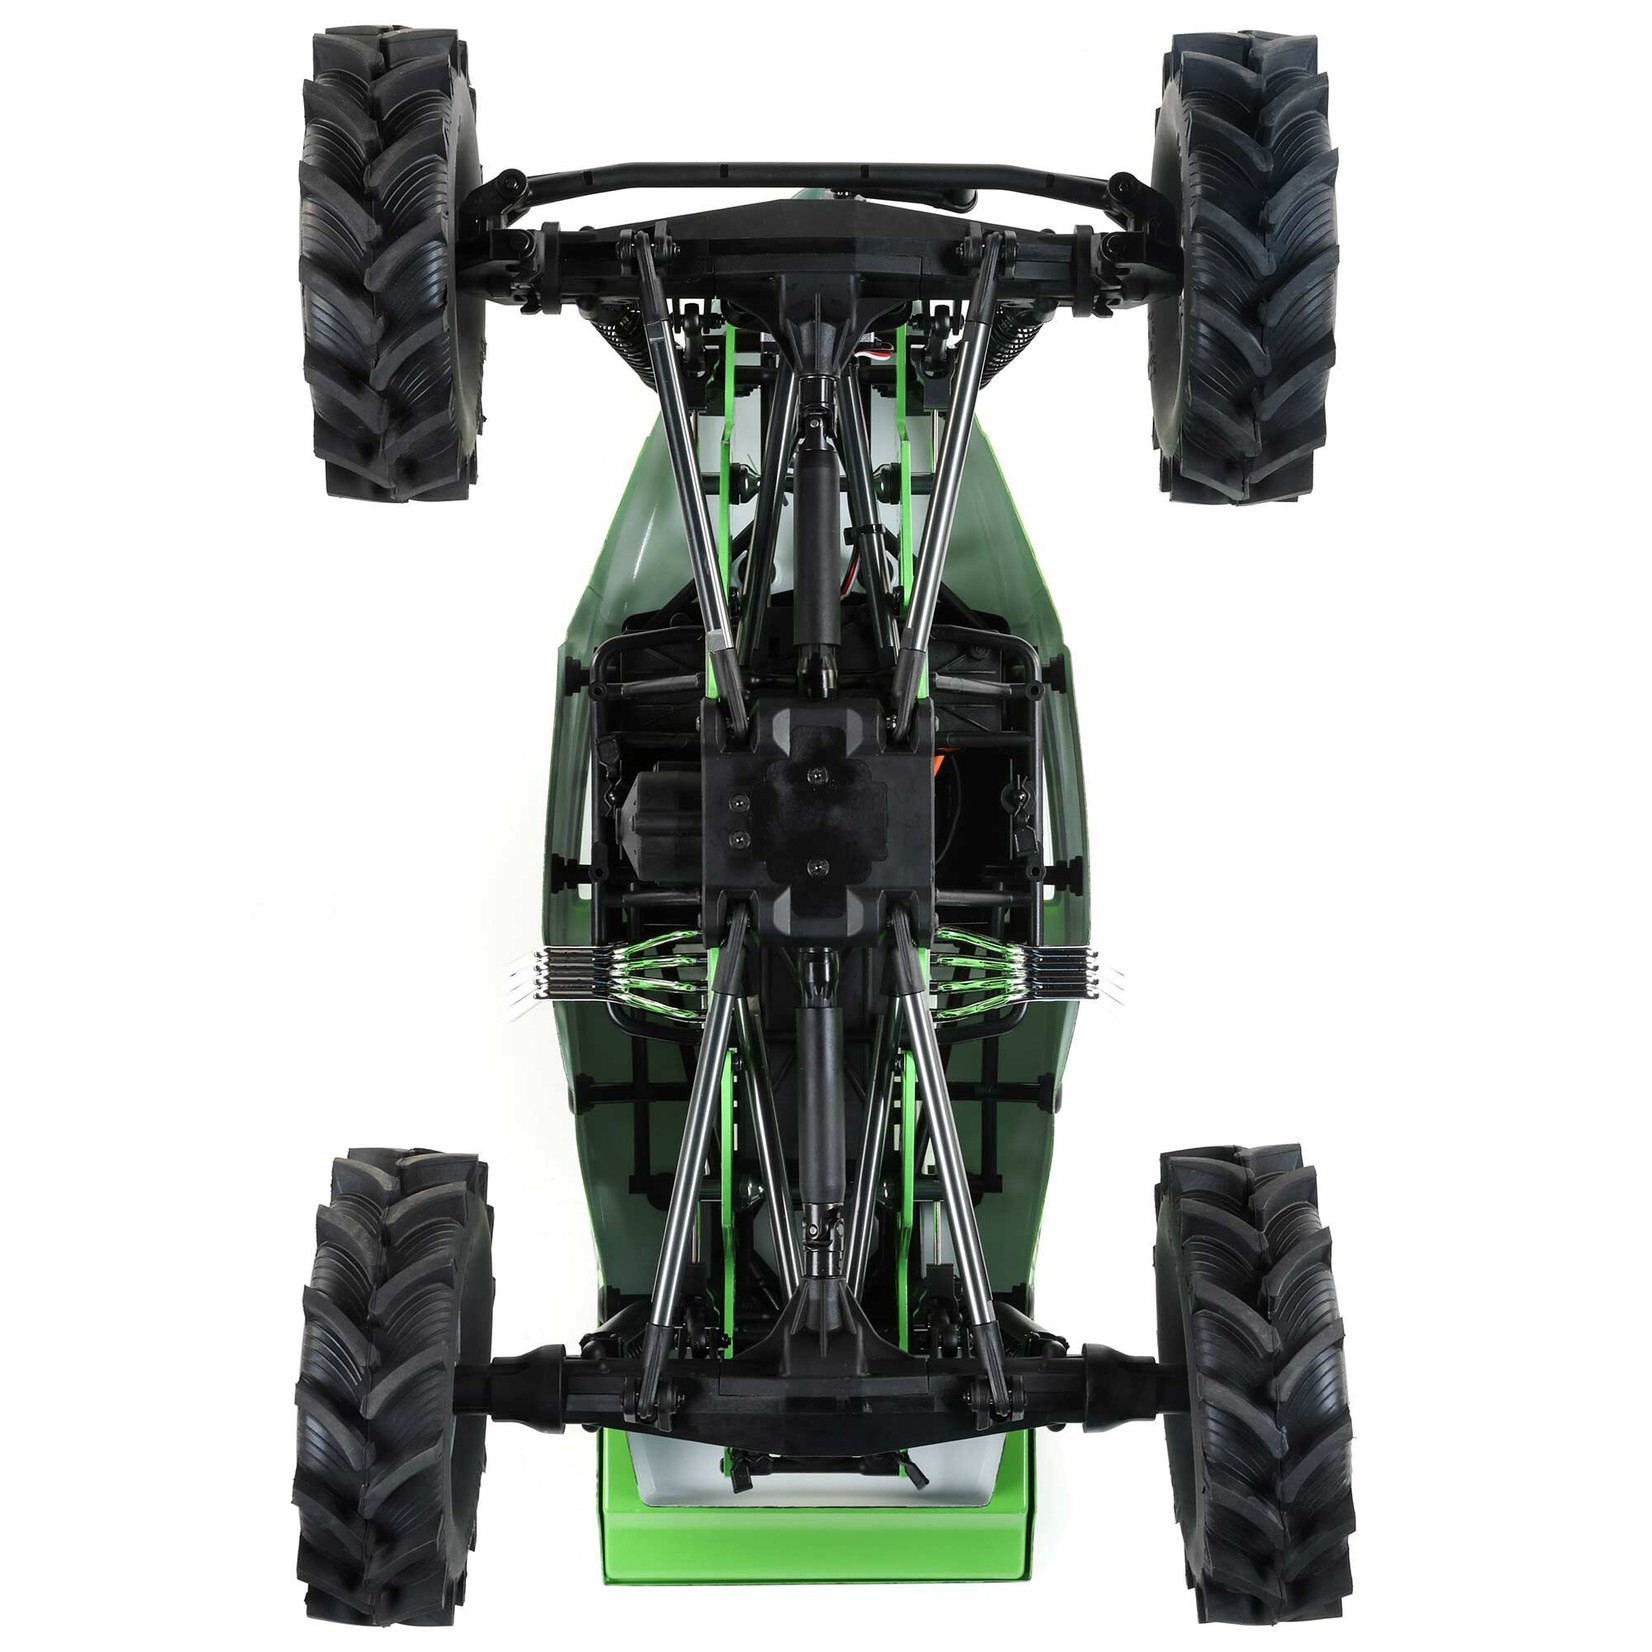 Losi LMT 4WD Solid Axle Mega Truck Brushless RTR, King Sling